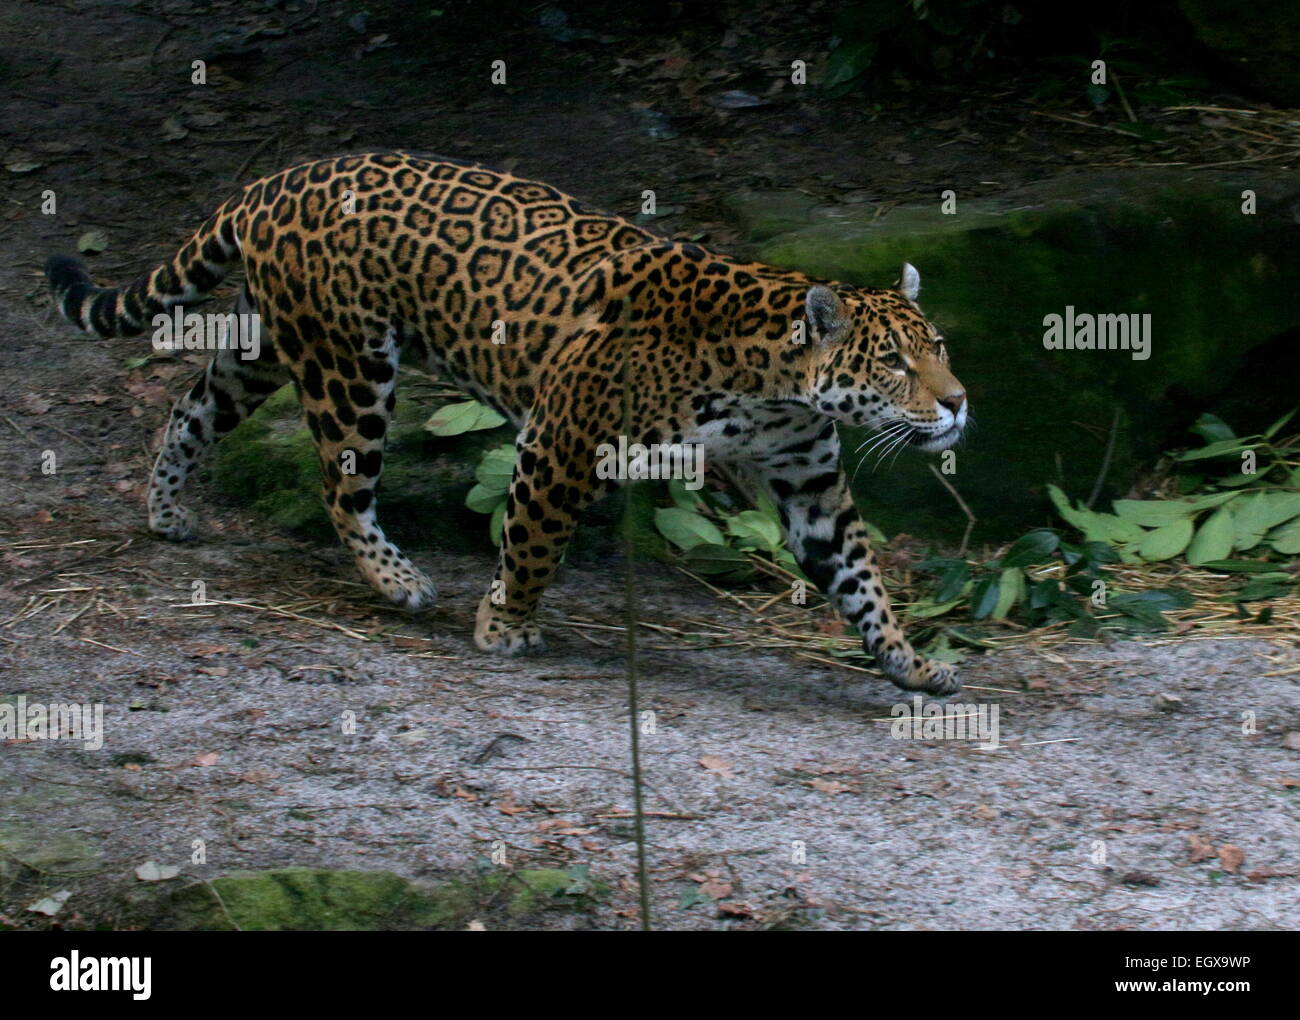 Female South American  Jaguar (Panthera onca) on the prowl, walking past Stock Photo